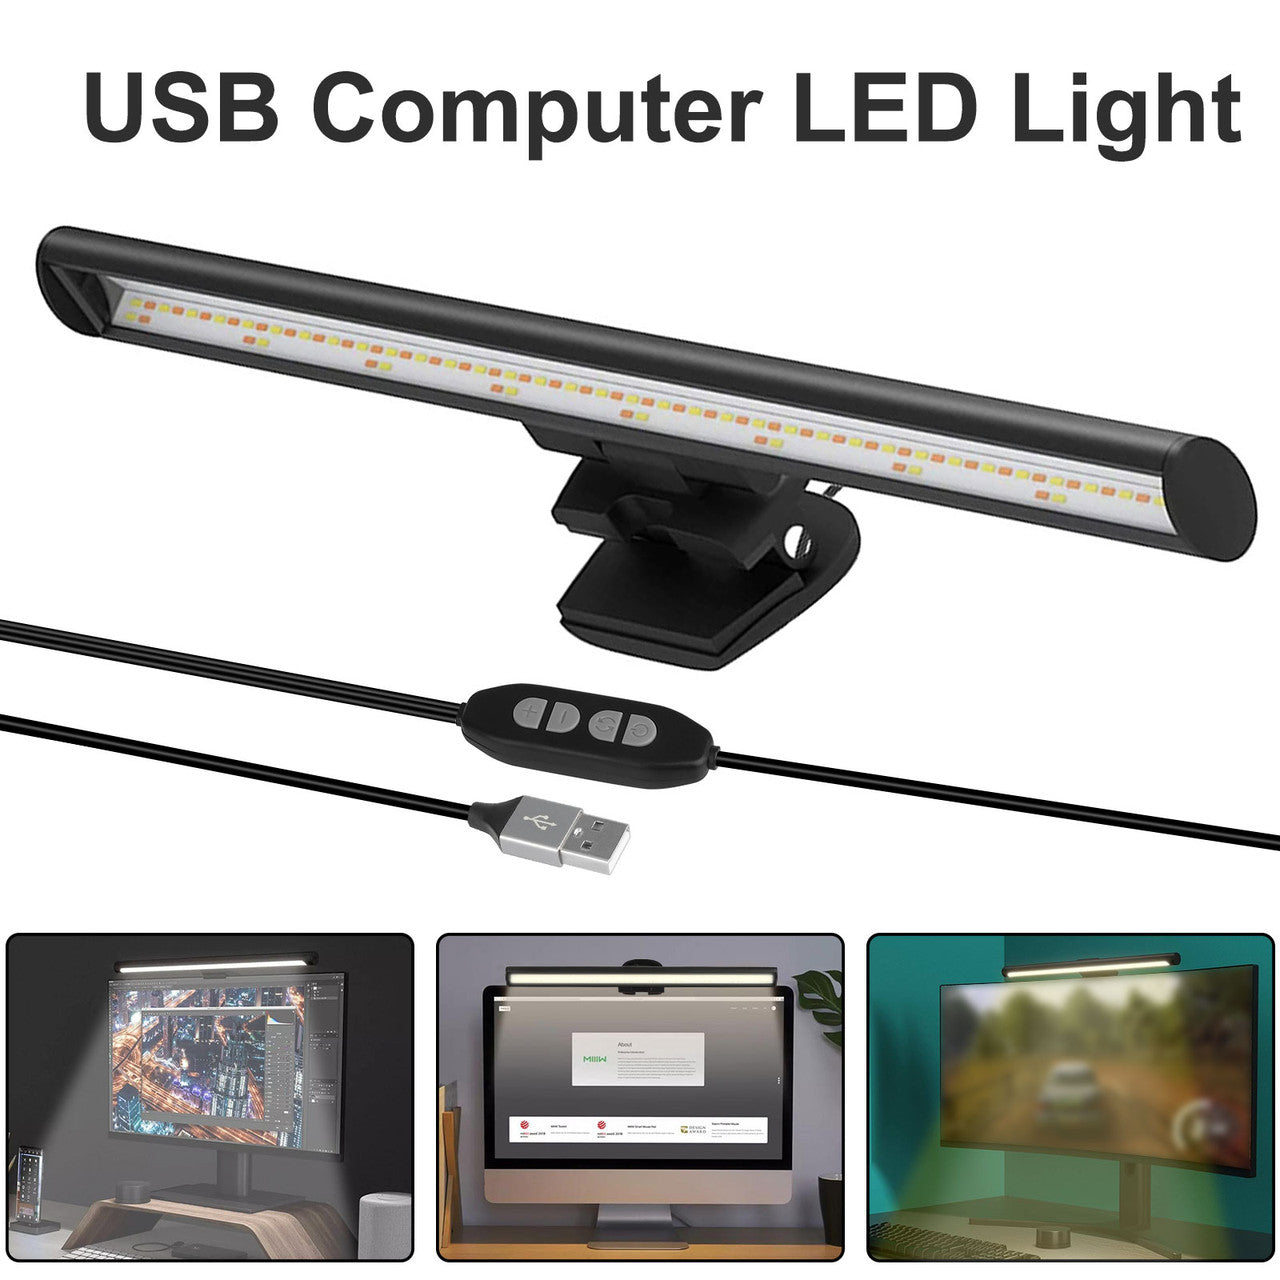 USB LED E-Reading Lamp Light with 3 Adjustable Color Temperature, Clip-on, No Screen Glare, Eye Care